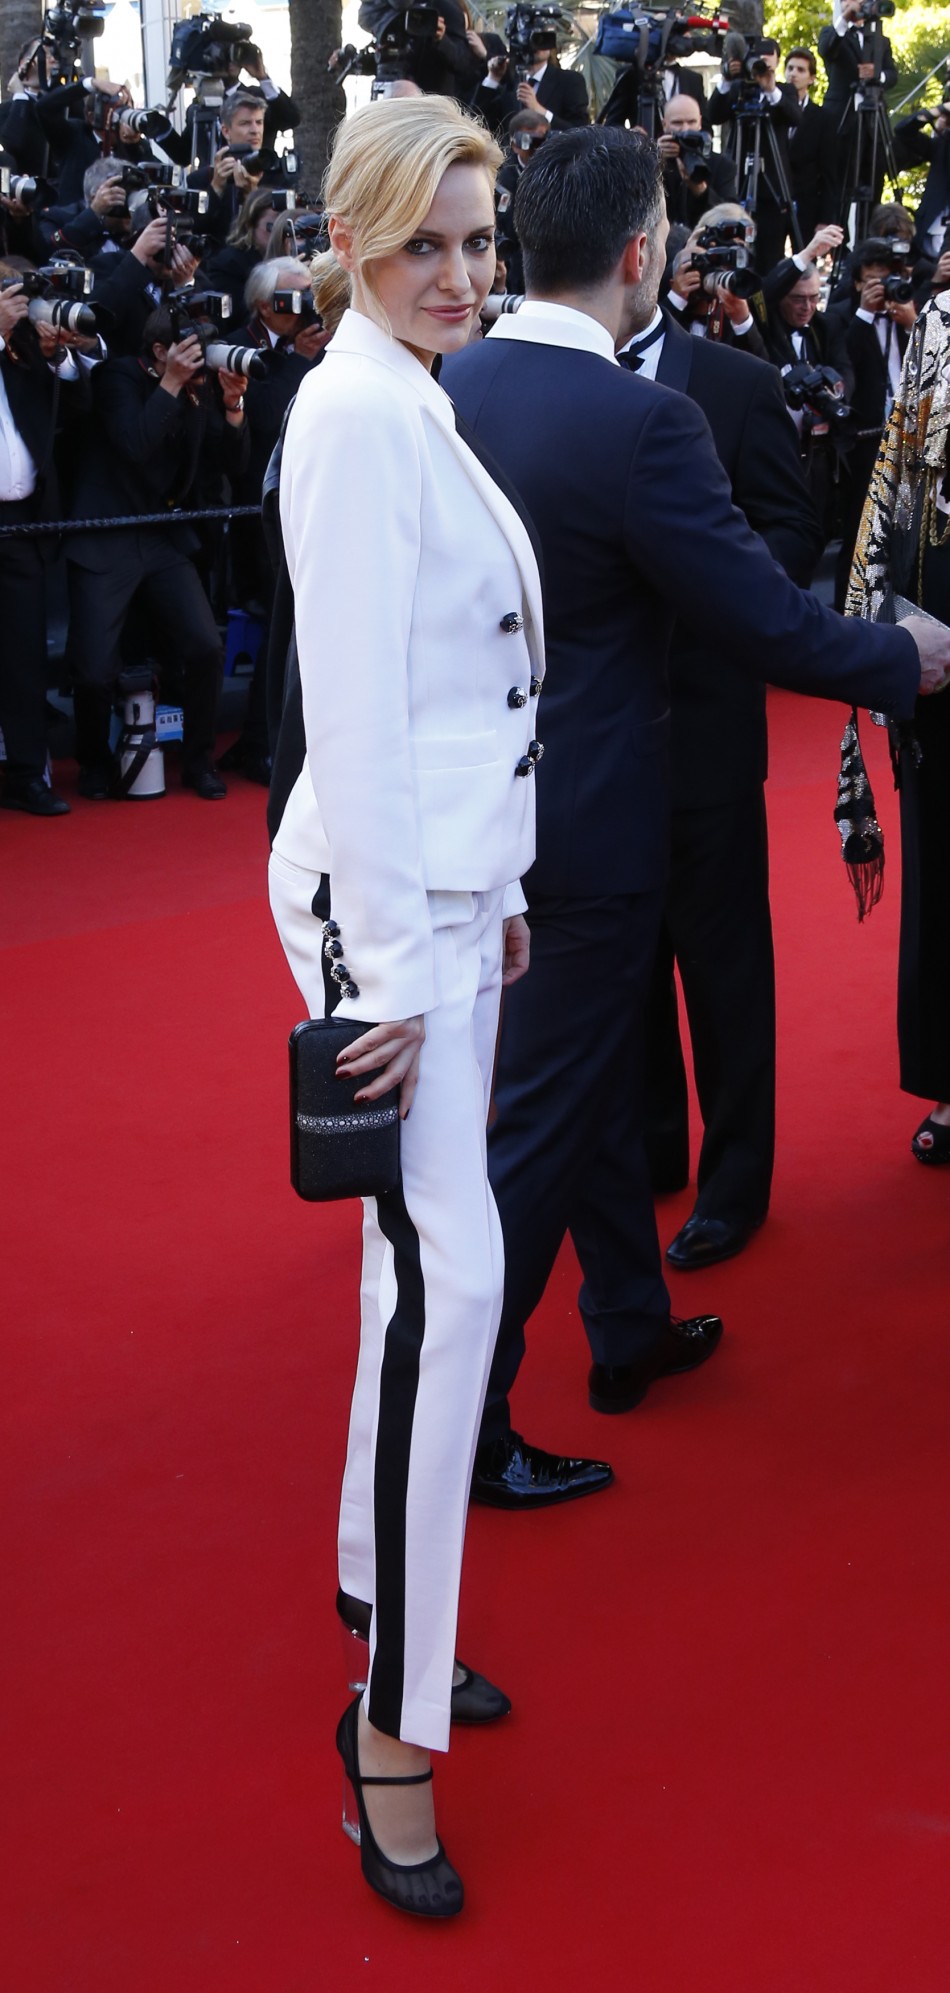 U.S. athlete, actress and fashion model Aimee Mullins poses on the red carpet as she arrives for the screening of the film Le Passe The Past in competition during the 66th Cannes Film Festival in Cannes May 17, 2013